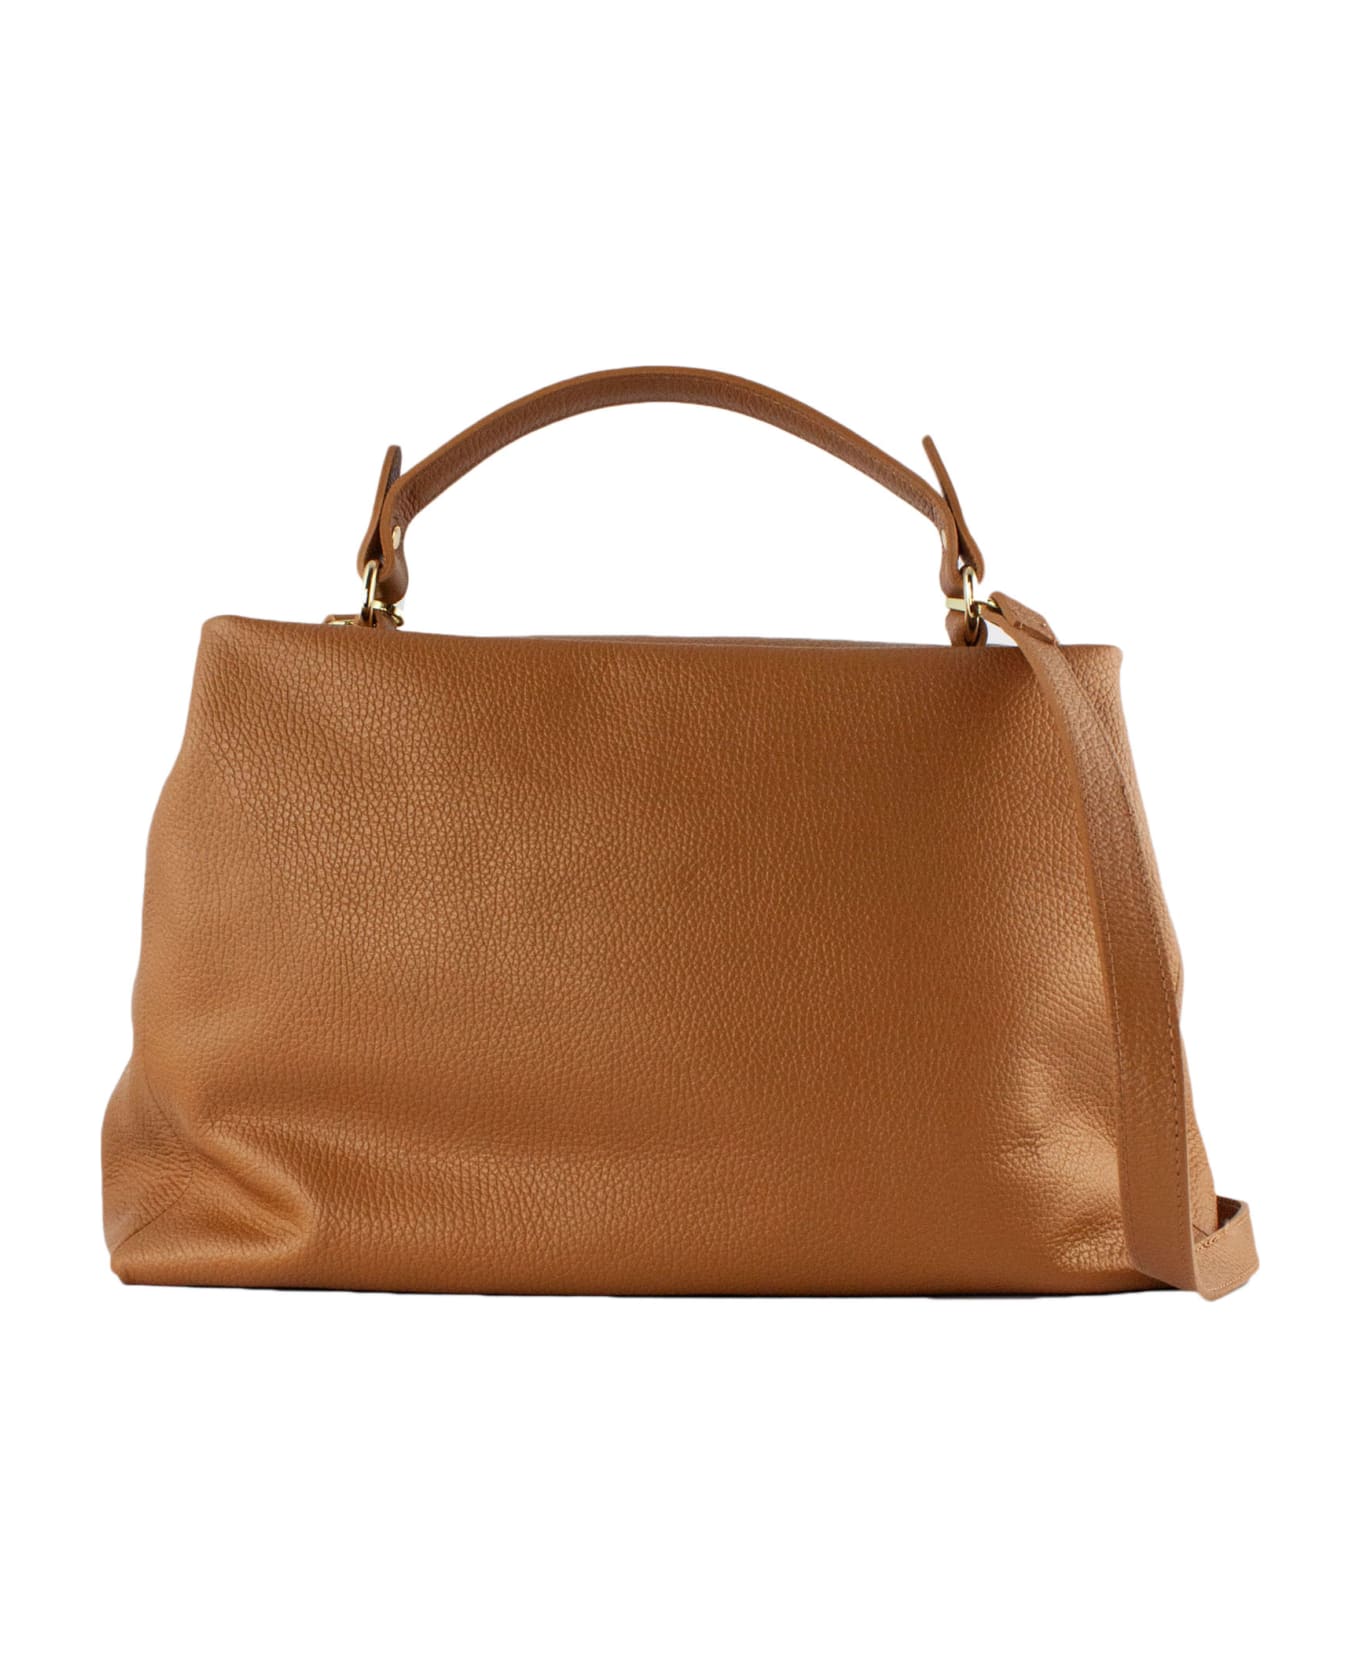 Avenue 67 Brown Grained Soft Leather Bag - Brown